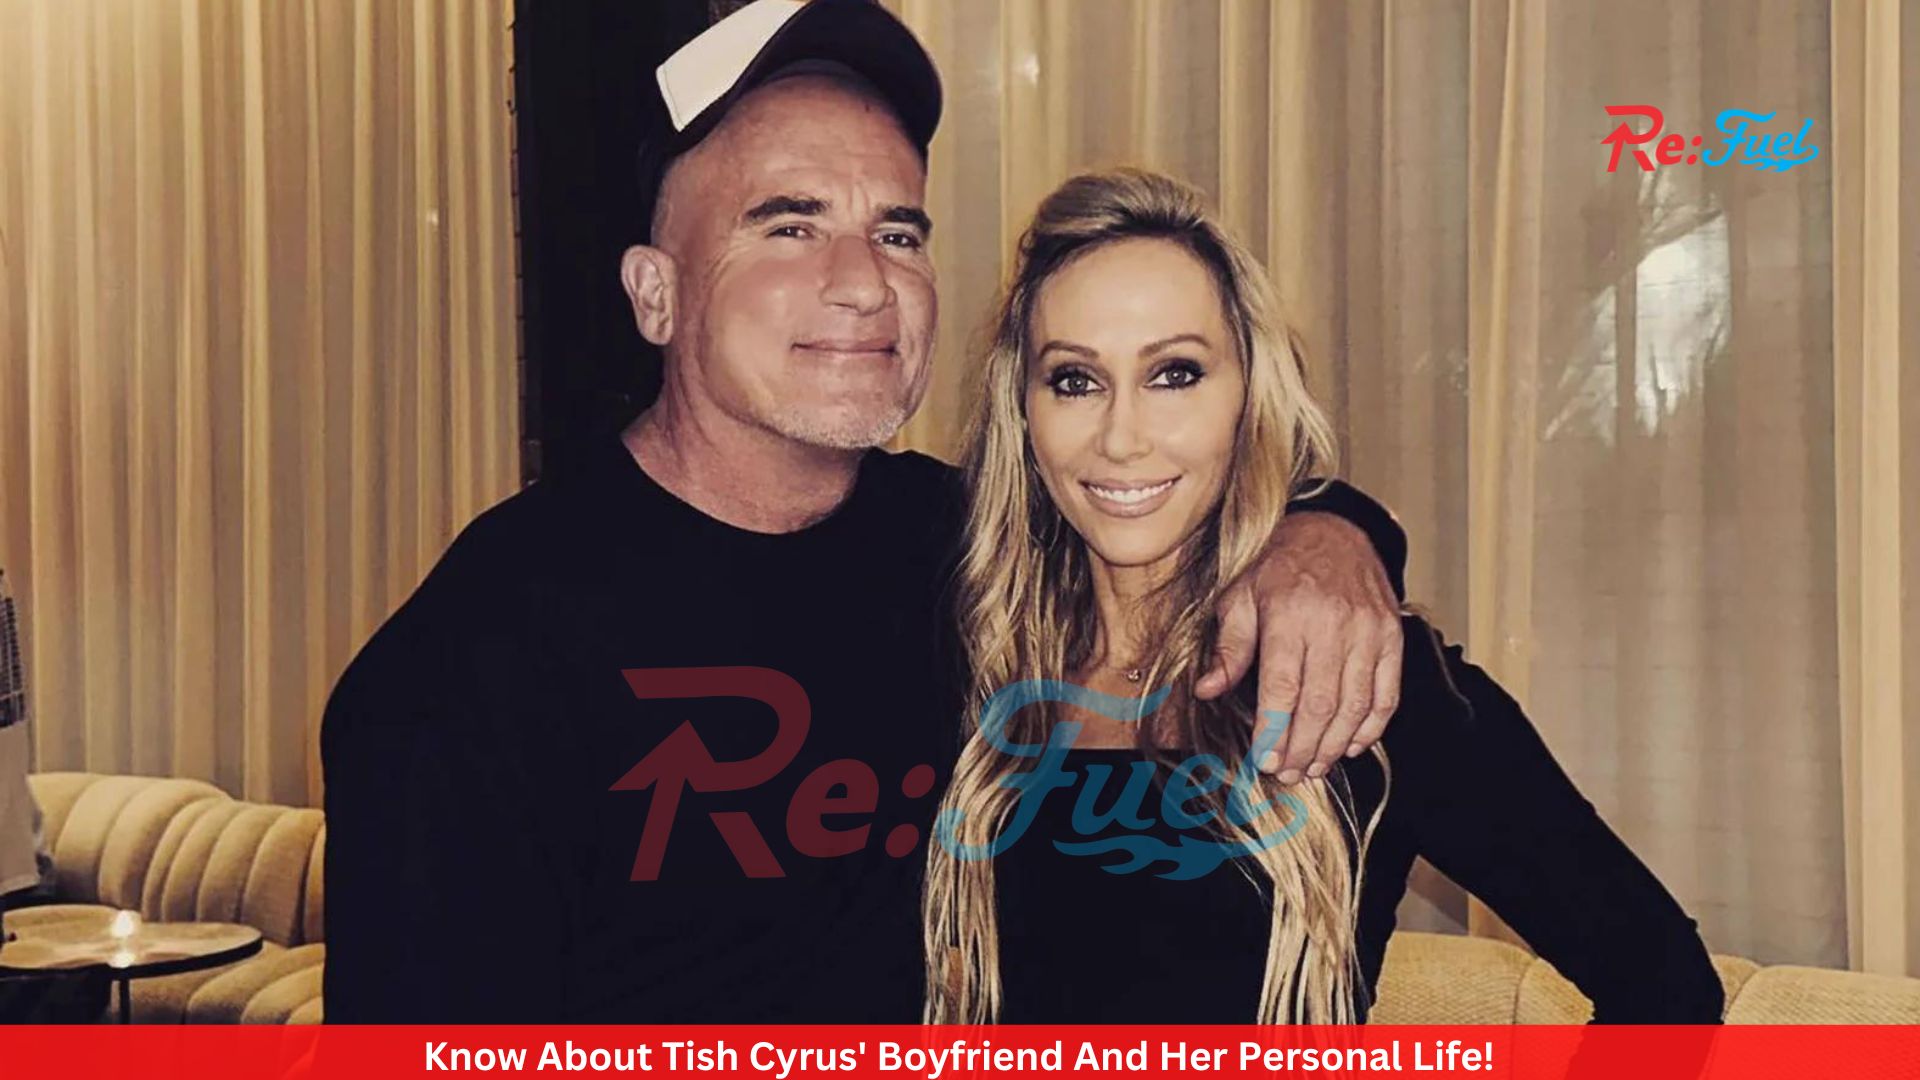 Know About Tish Cyrus' Boyfriend And Her Personal Life!